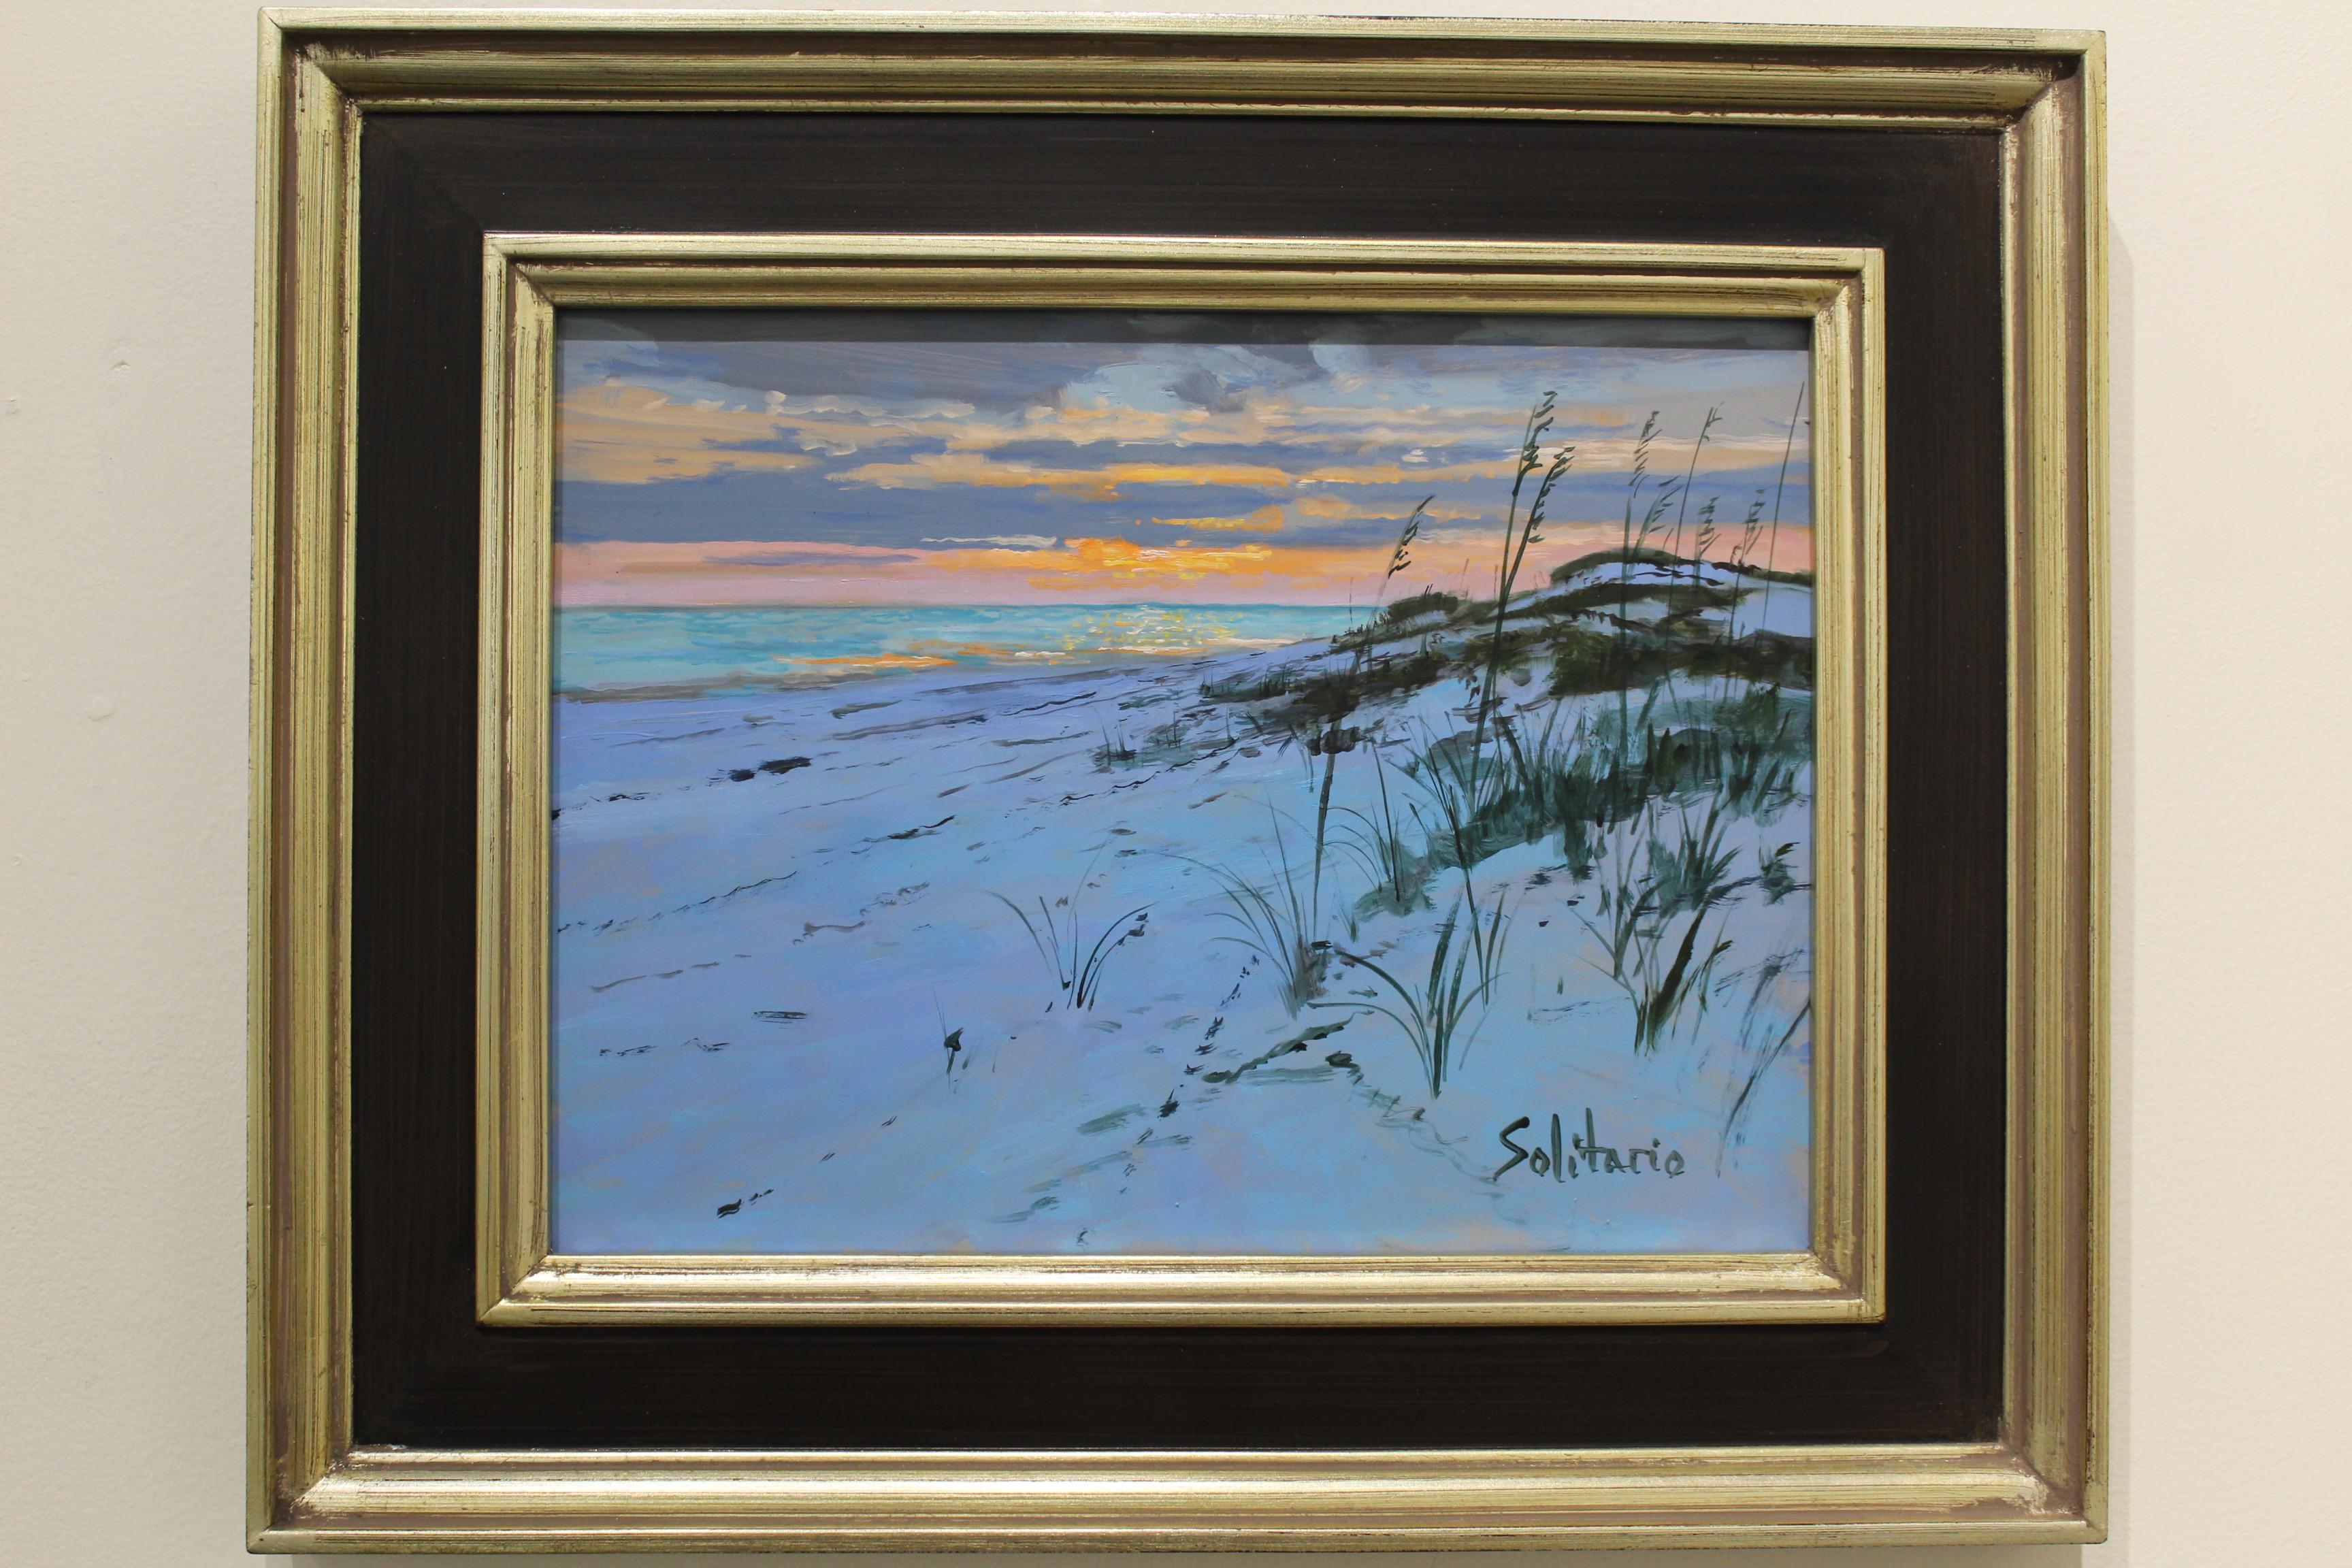 Sunset Southside Horn Island - Painting by Billy Solitario